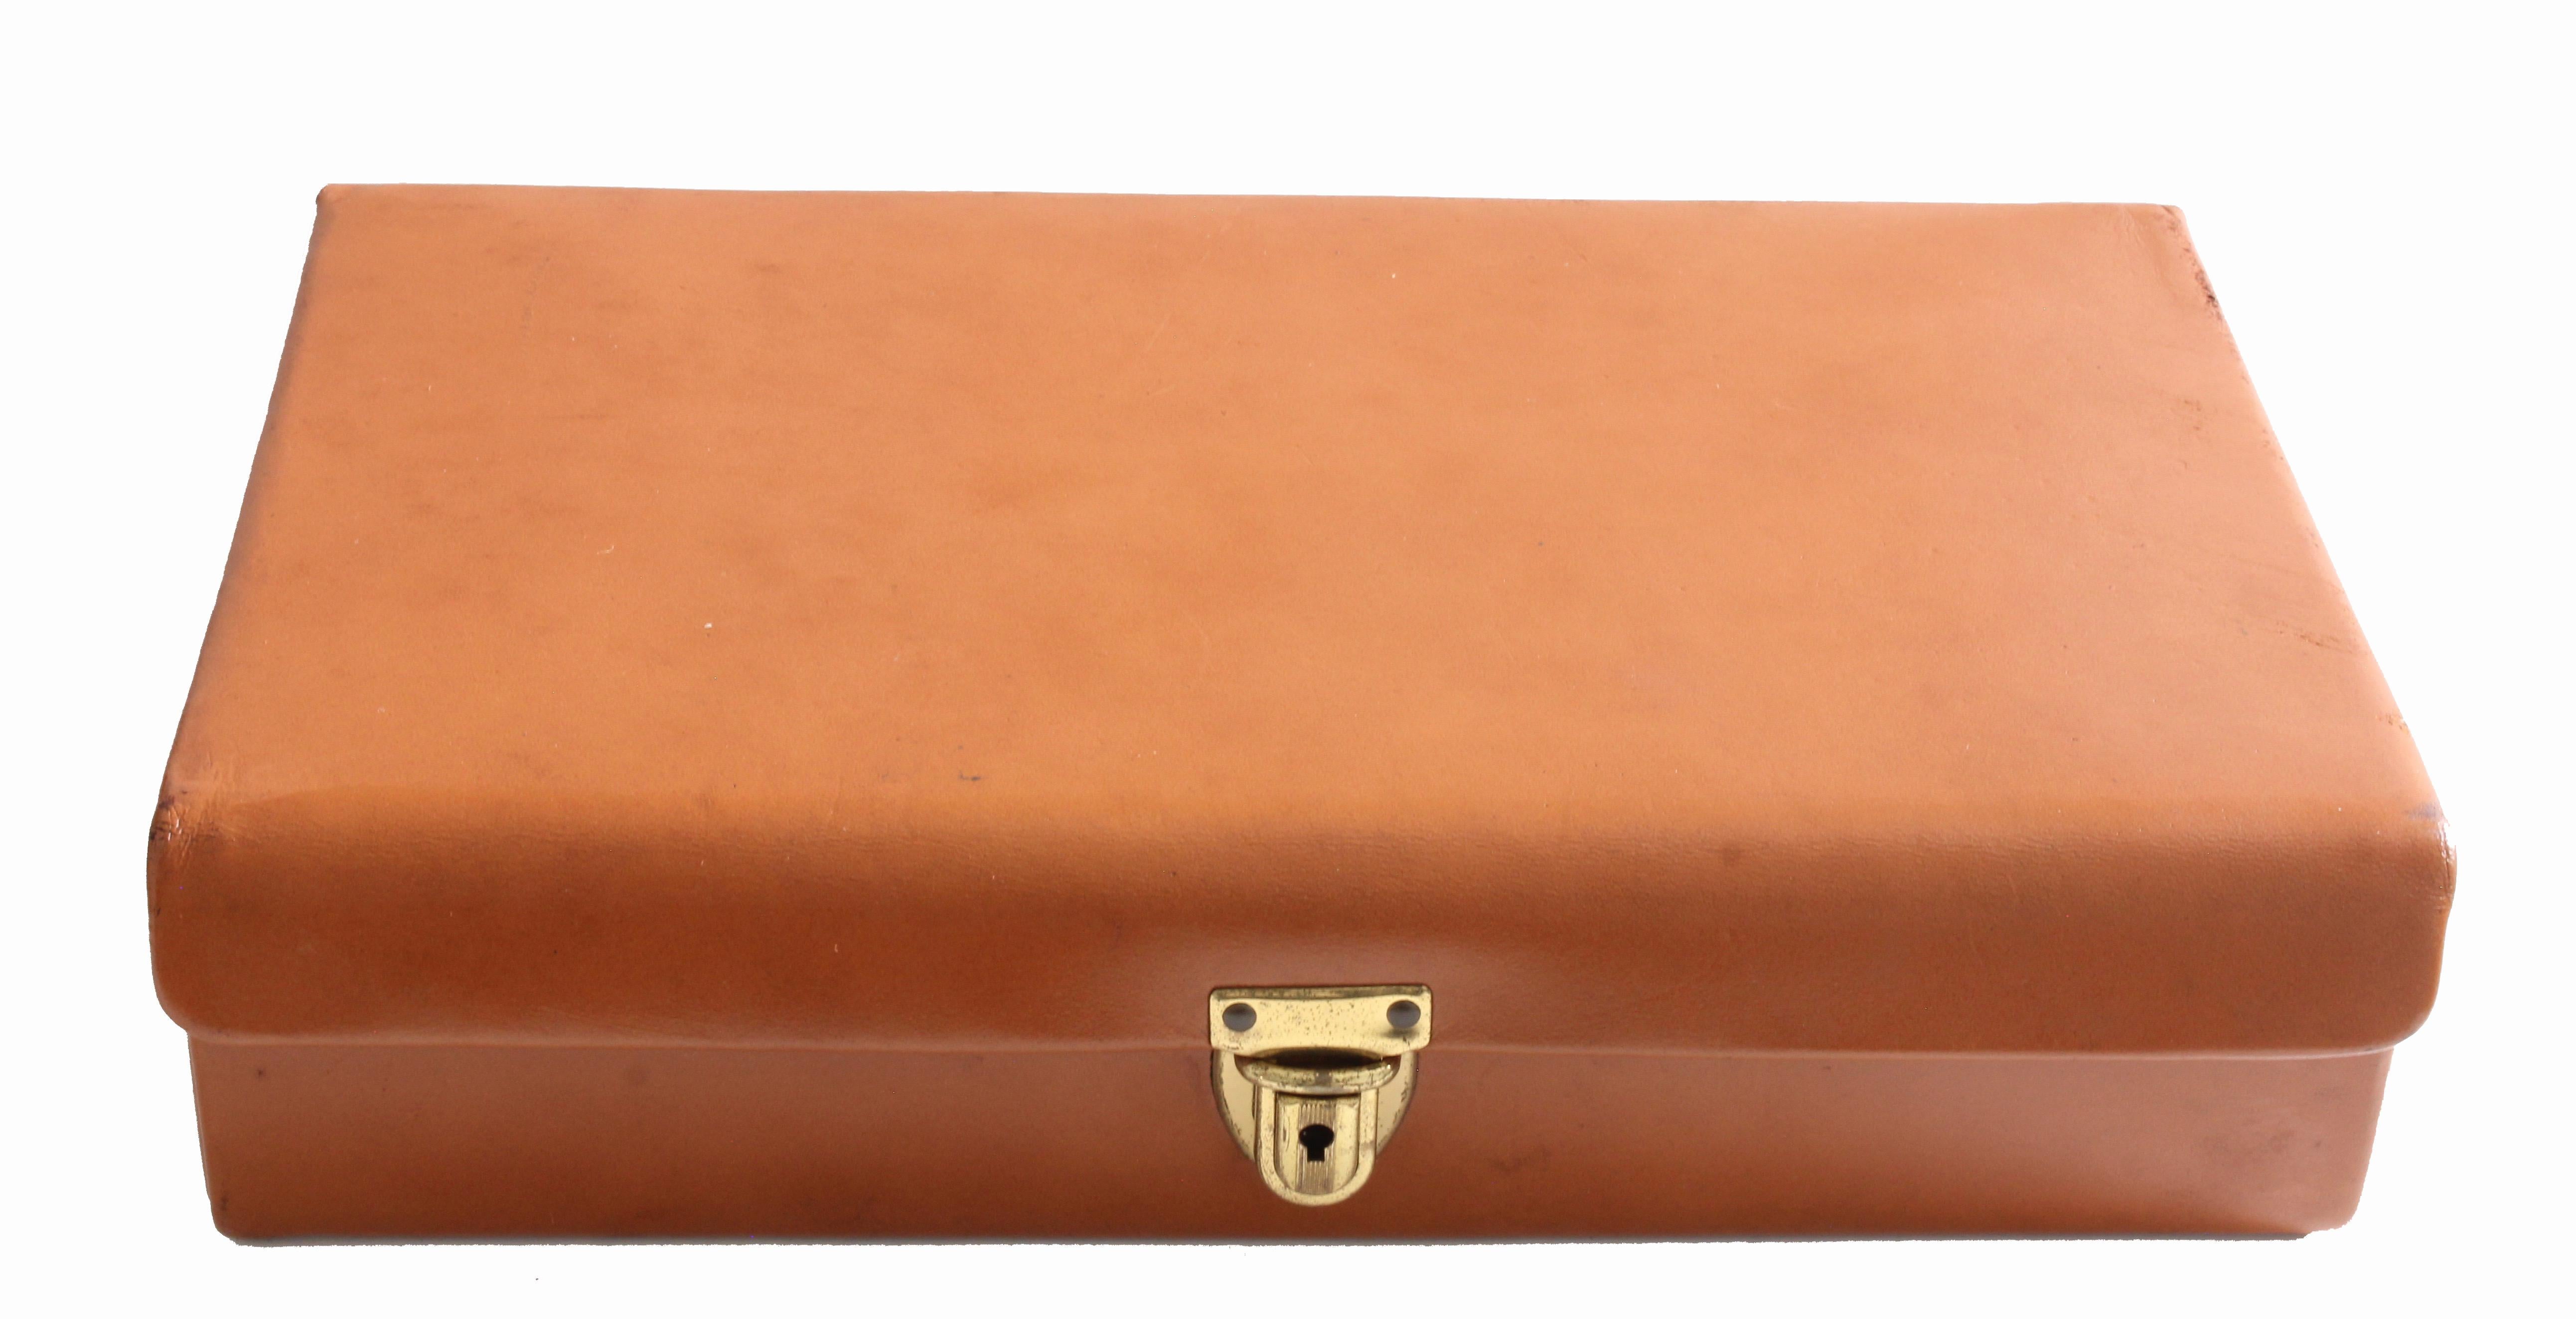 This leather jewelry case was likely made in the 1970s, and features a push lock fastener with key.  The interior is lined in suede and features a ring holder, a sueded pillow and compartment and a leather strap chain or bracelet holder on it's